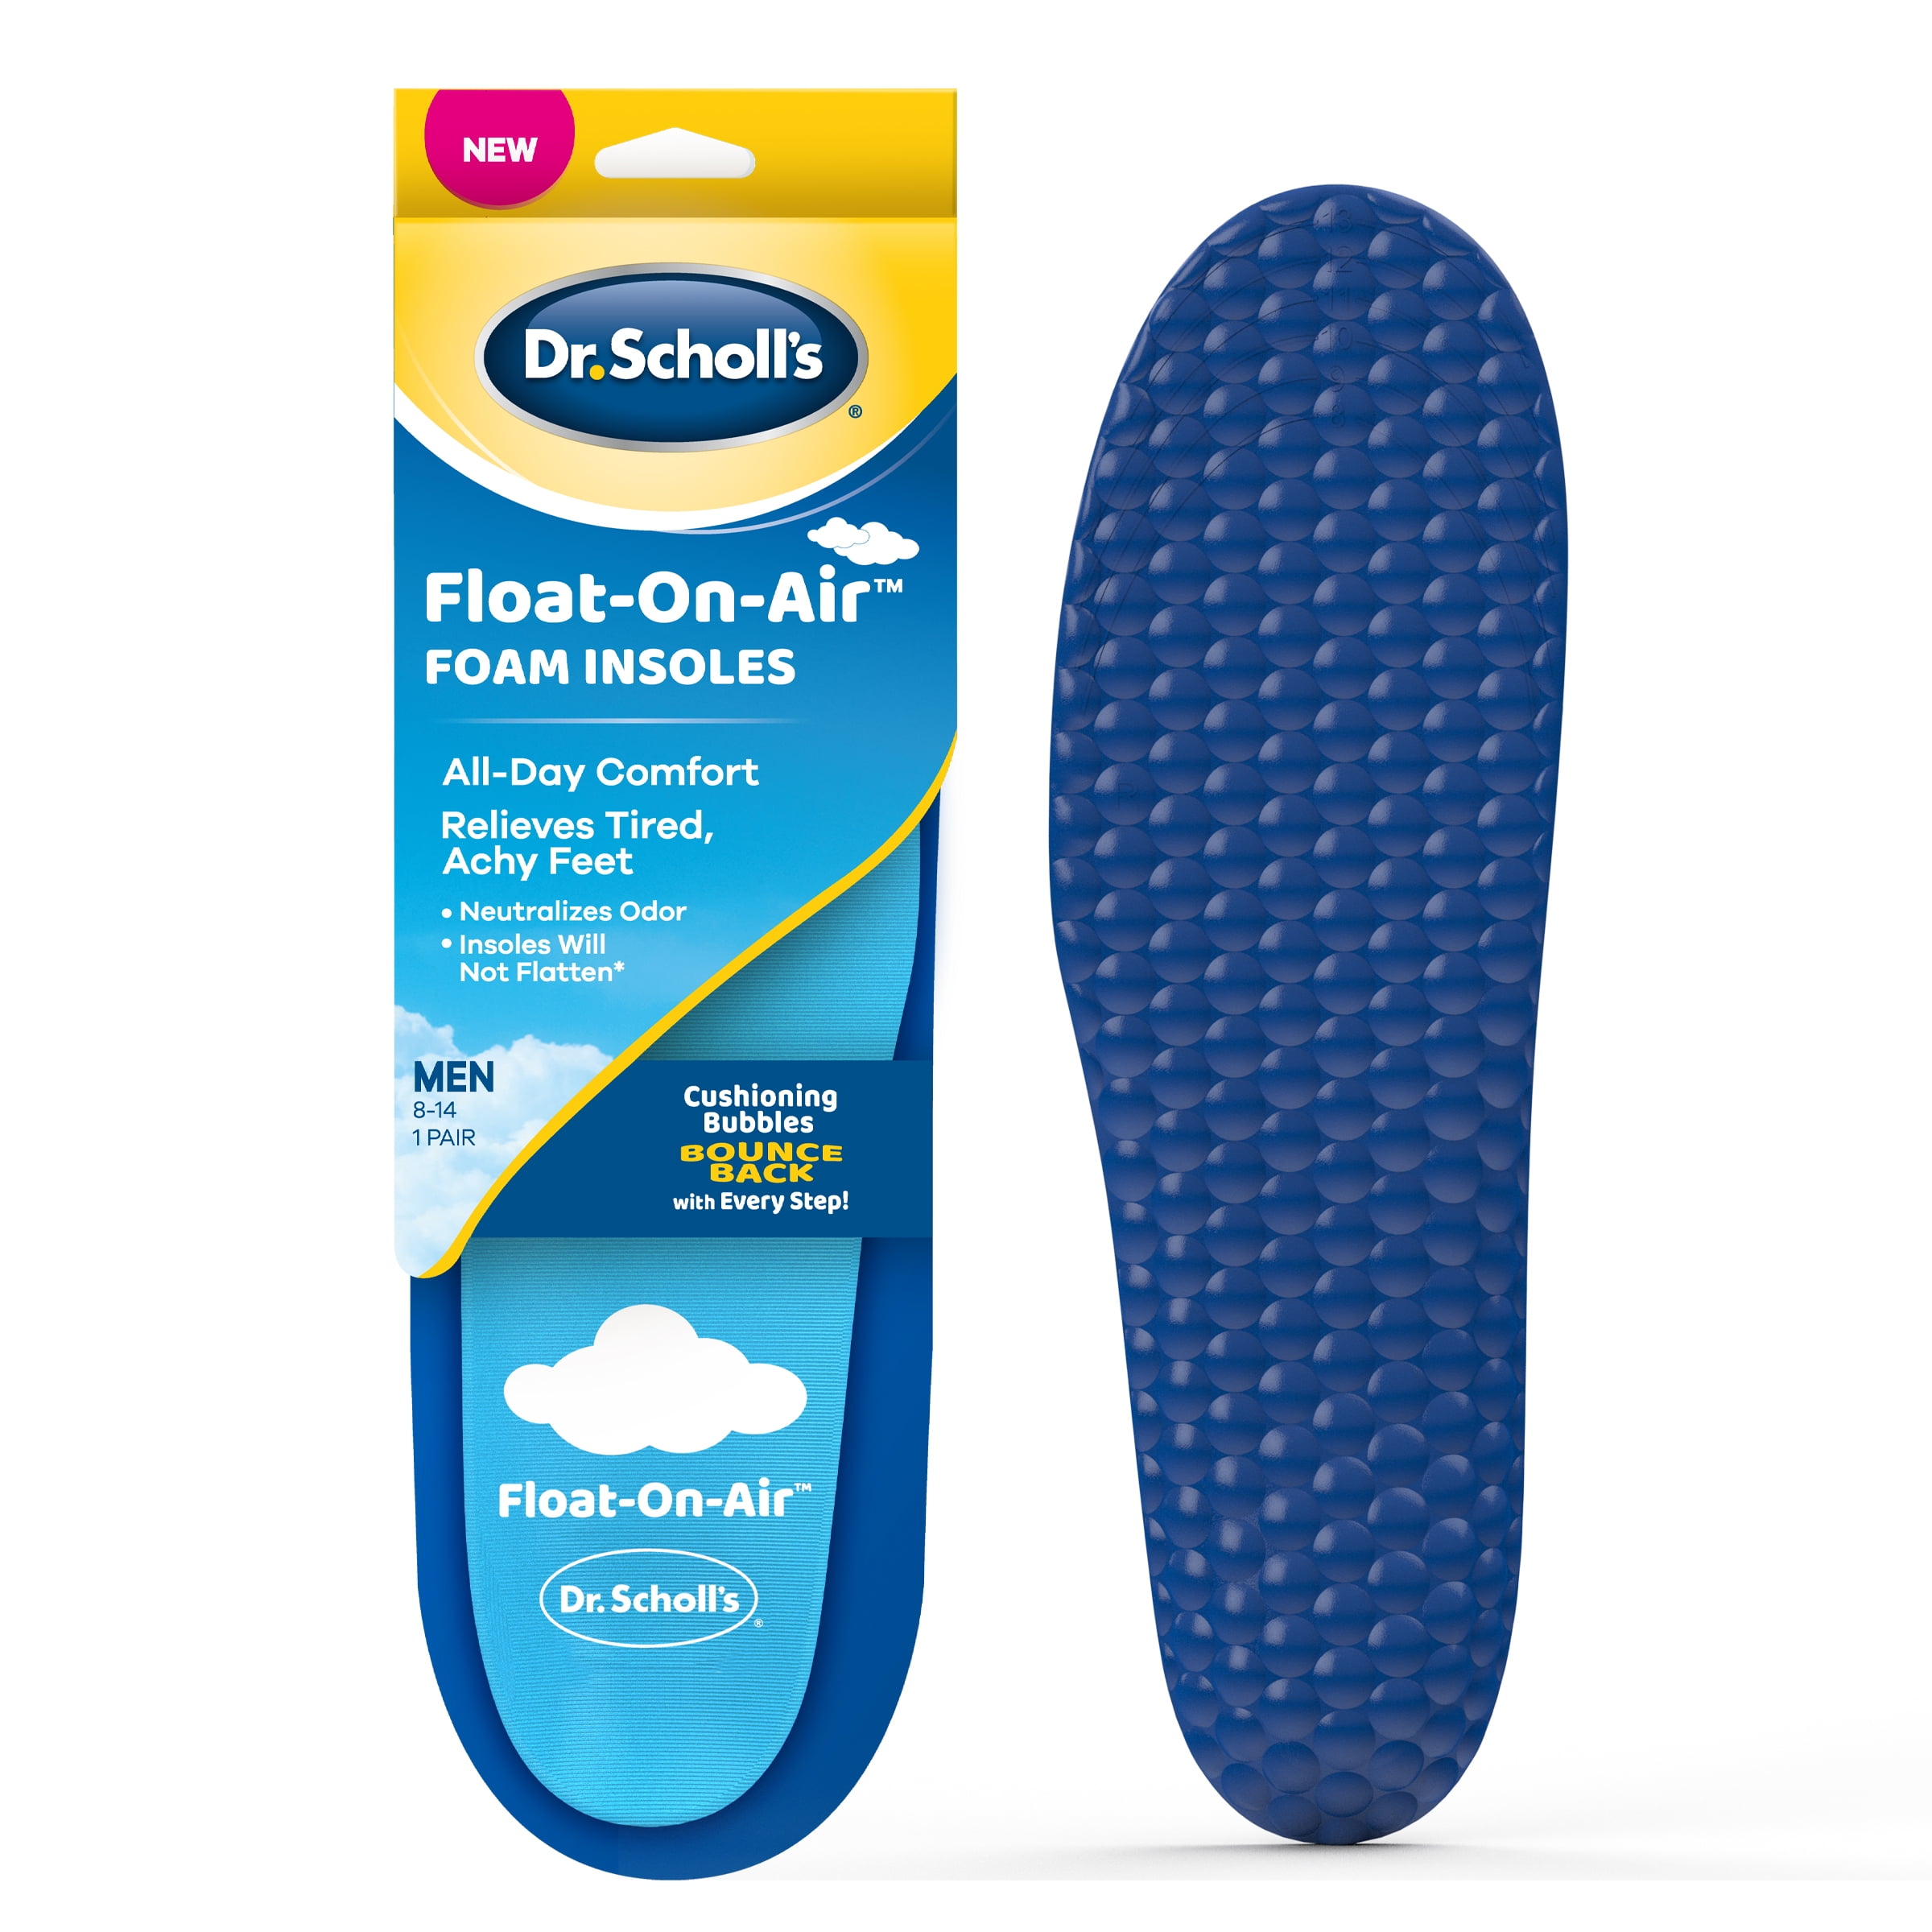 Dr. Scholl's Float-On-Air Insoles for Men, Shoe Inserts That Relieve Tired, Achy Feet with All Day Comfort, , Men's size 8-14, 1 Pair